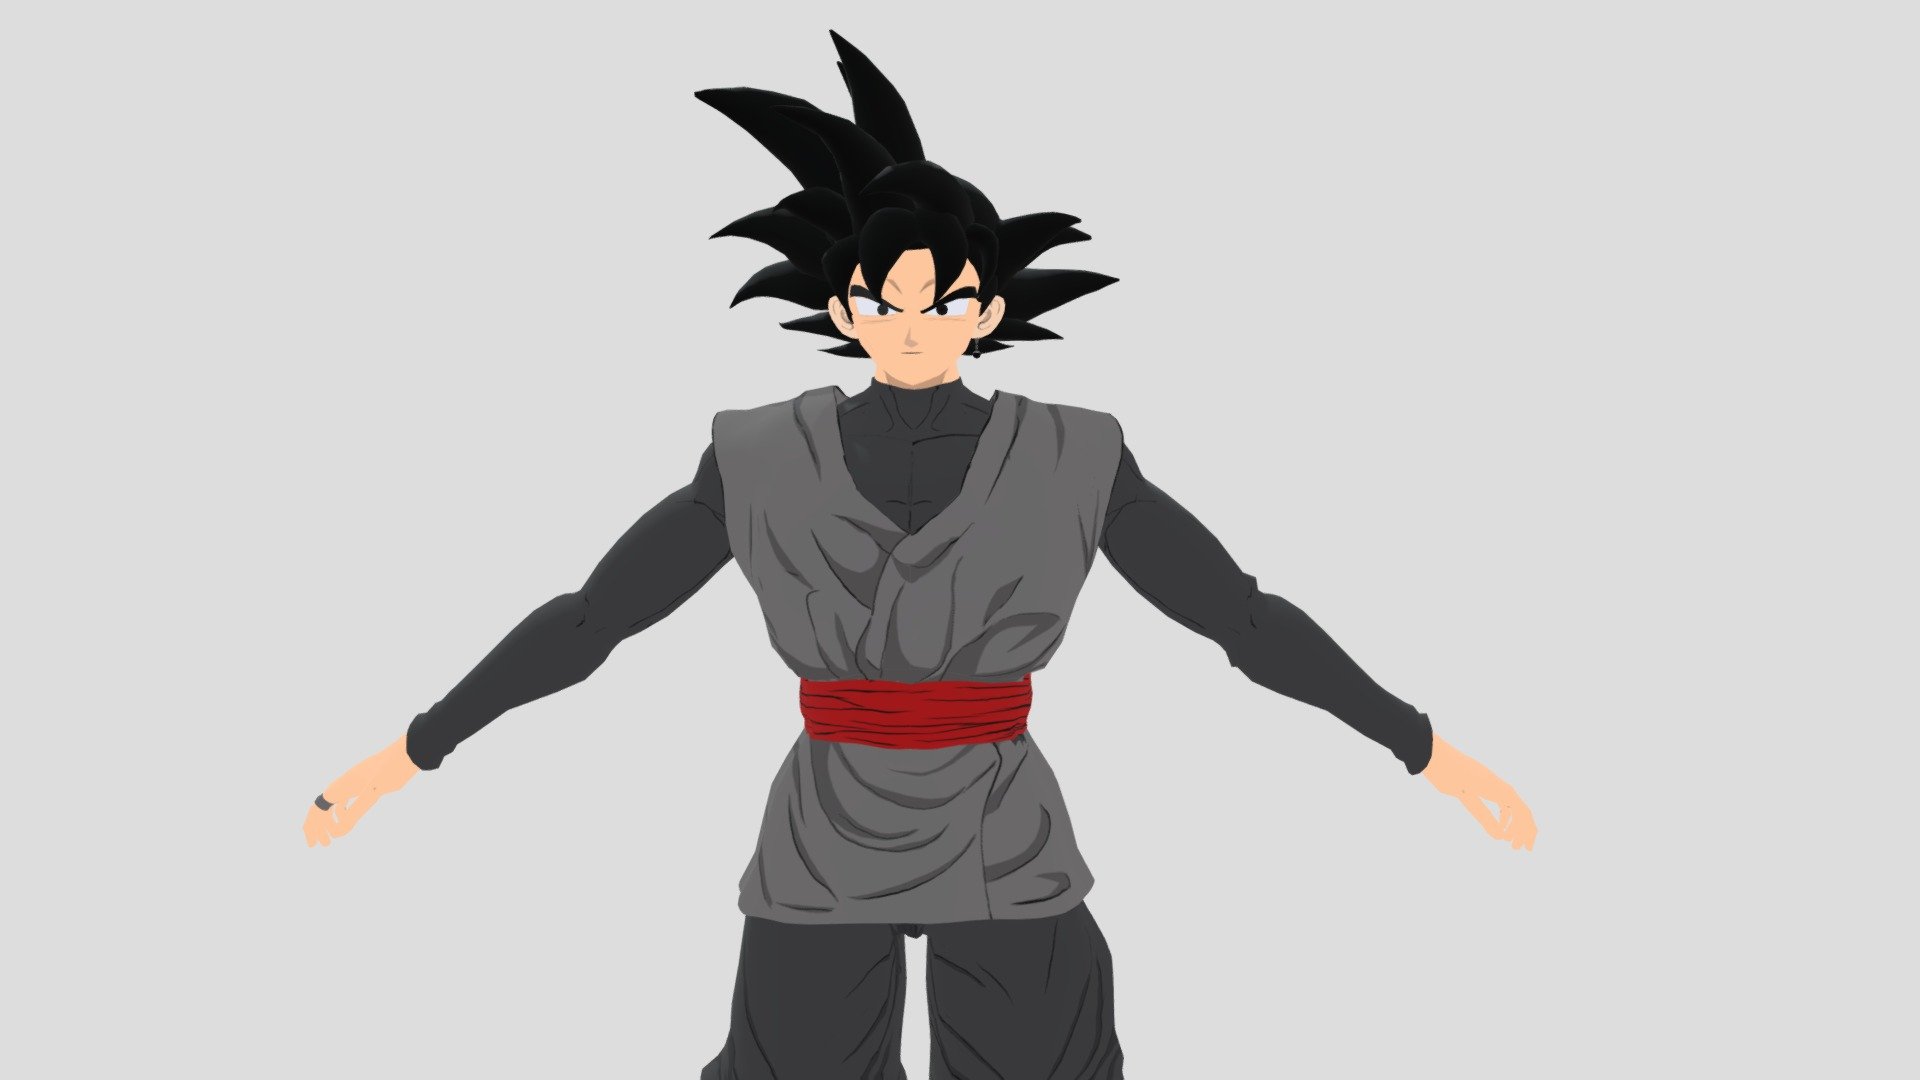 3D rigged Model of Black Goku from Dragonball Super franchise

All Forms Included

Shape-keys for hair forms and facial expressions

Game-ready and avaiable in both .blend and .fbx file formats

Medium poly

includes all textures

.blend includes a Cel-Shaded Version

Available here

https://www.artstation.com/flamelex/store




Model Specfications
Objects : 20
Faces : 14,416
Vertcies : 14,946
Triangles: 30,505
Bones: 257
Textures: 12
Textures dimensions: between 2048x2048 and 4072x4072 (depending on the object) - Black Goku Model Rigged - 3D model by Flamelex 3d model